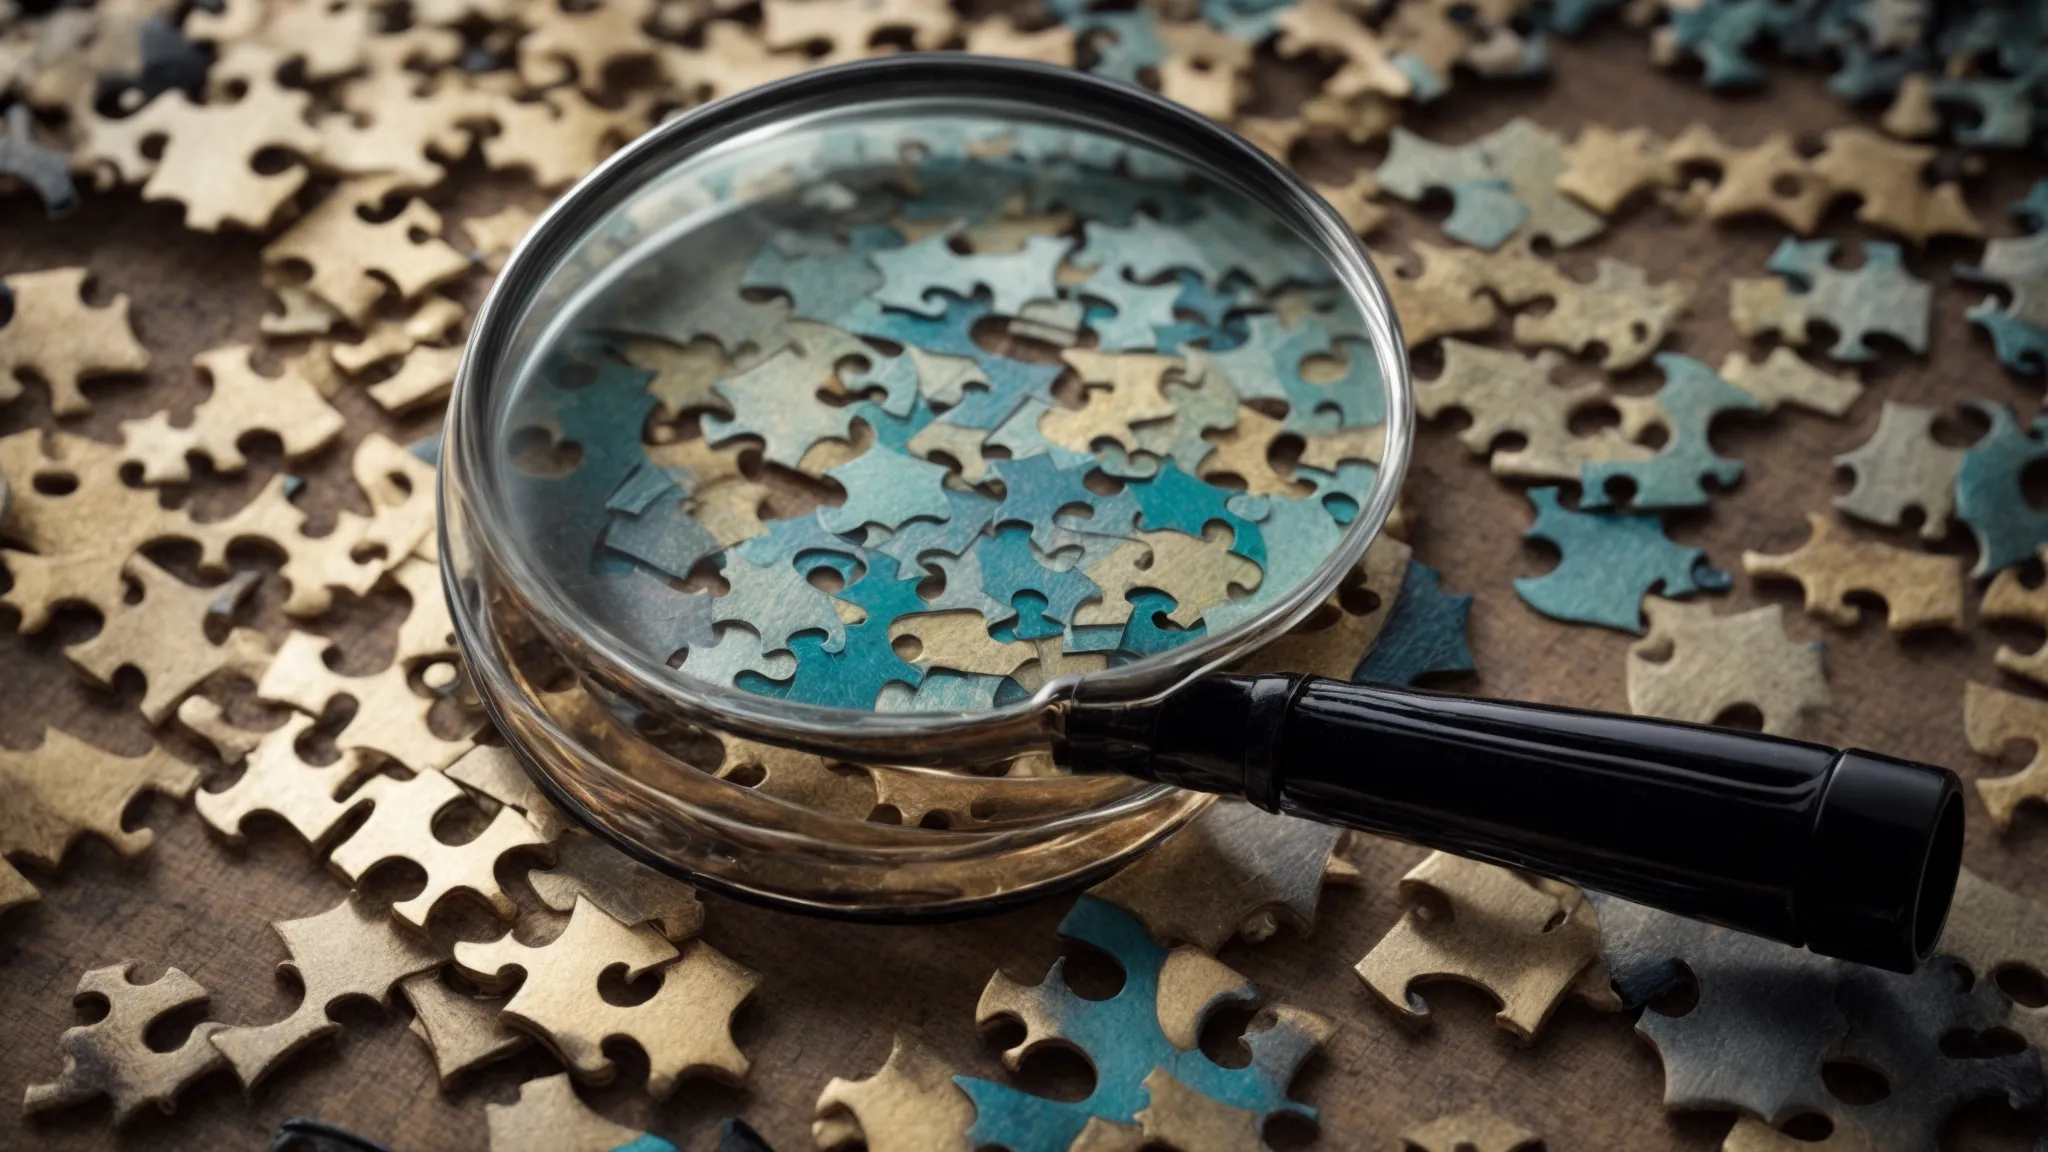 a magnifying glass resting on a jigsaw puzzle, symbolizing precision and focus.